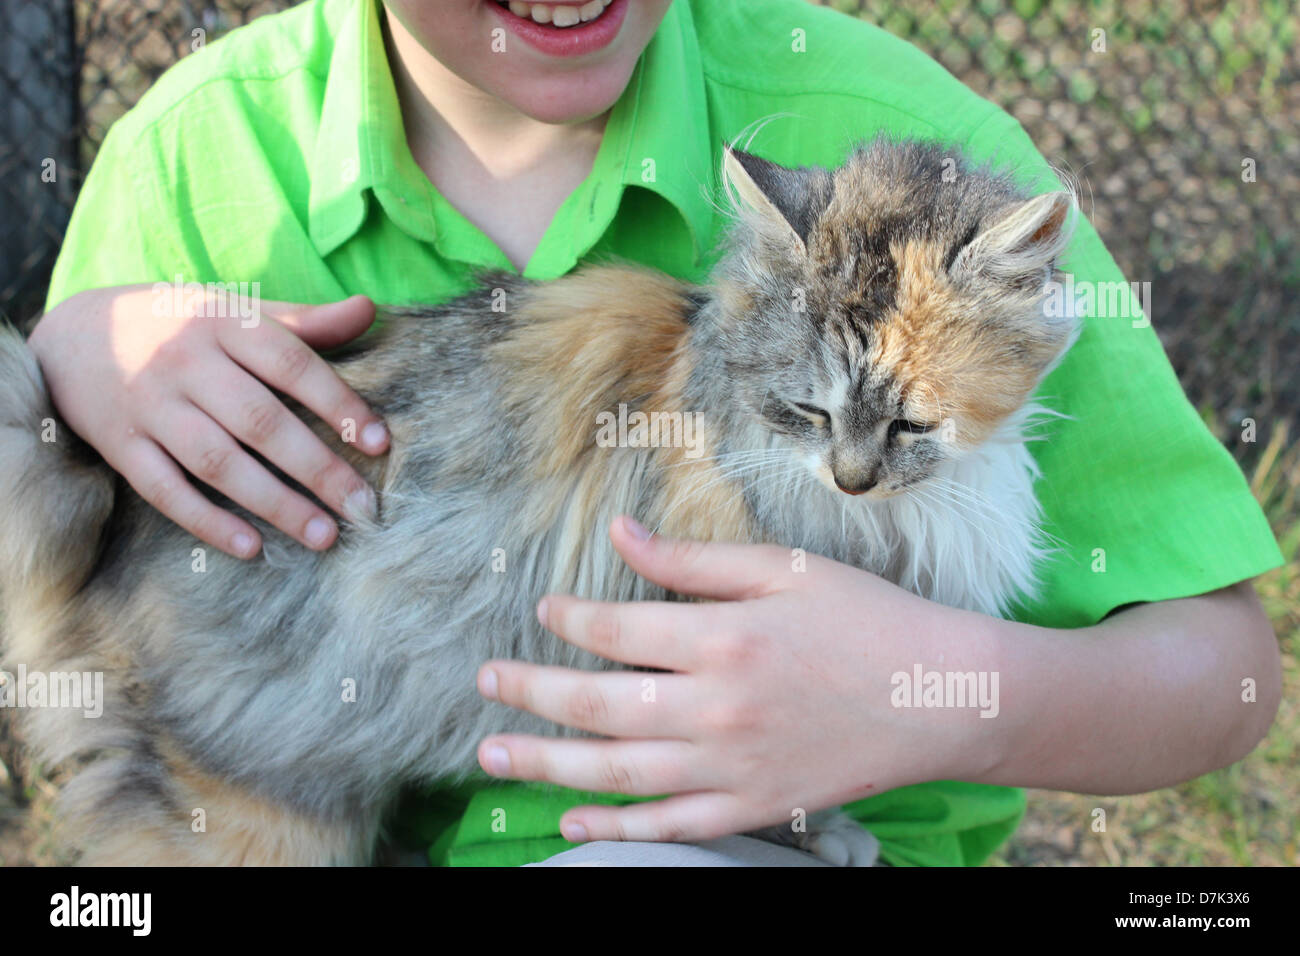 image of different colors cat on children's hand Stock Photo